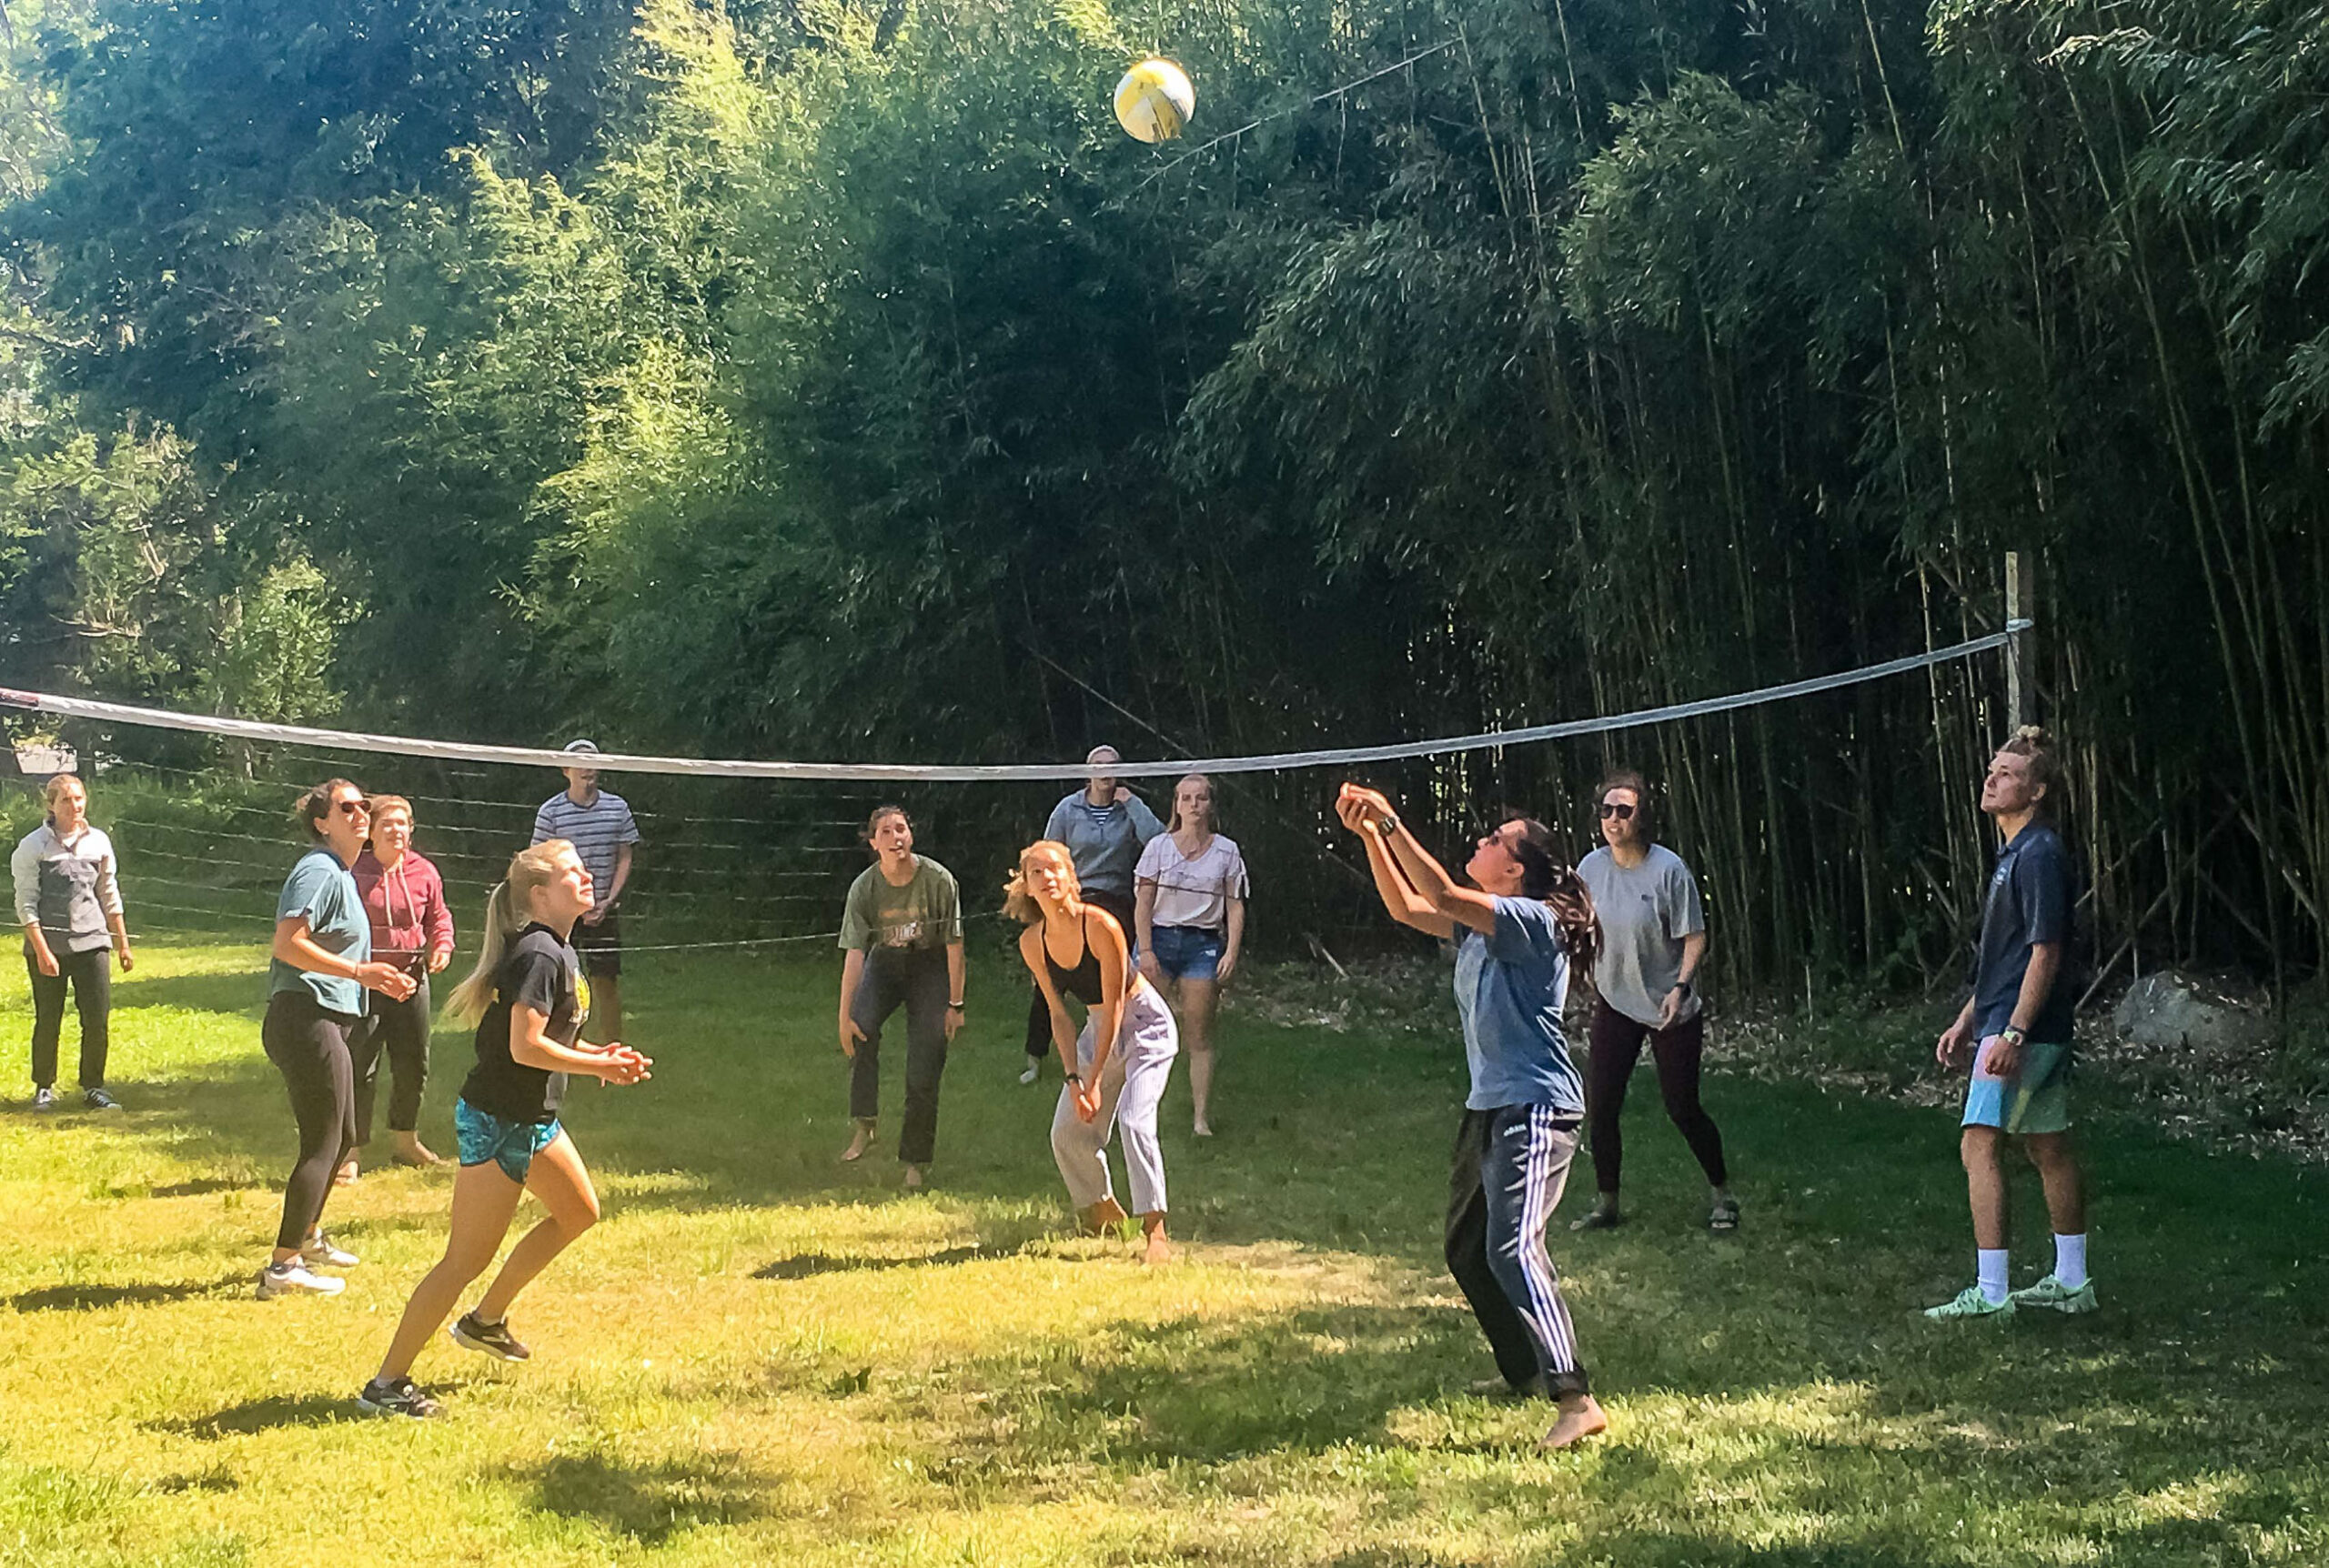 Volleyball on campus